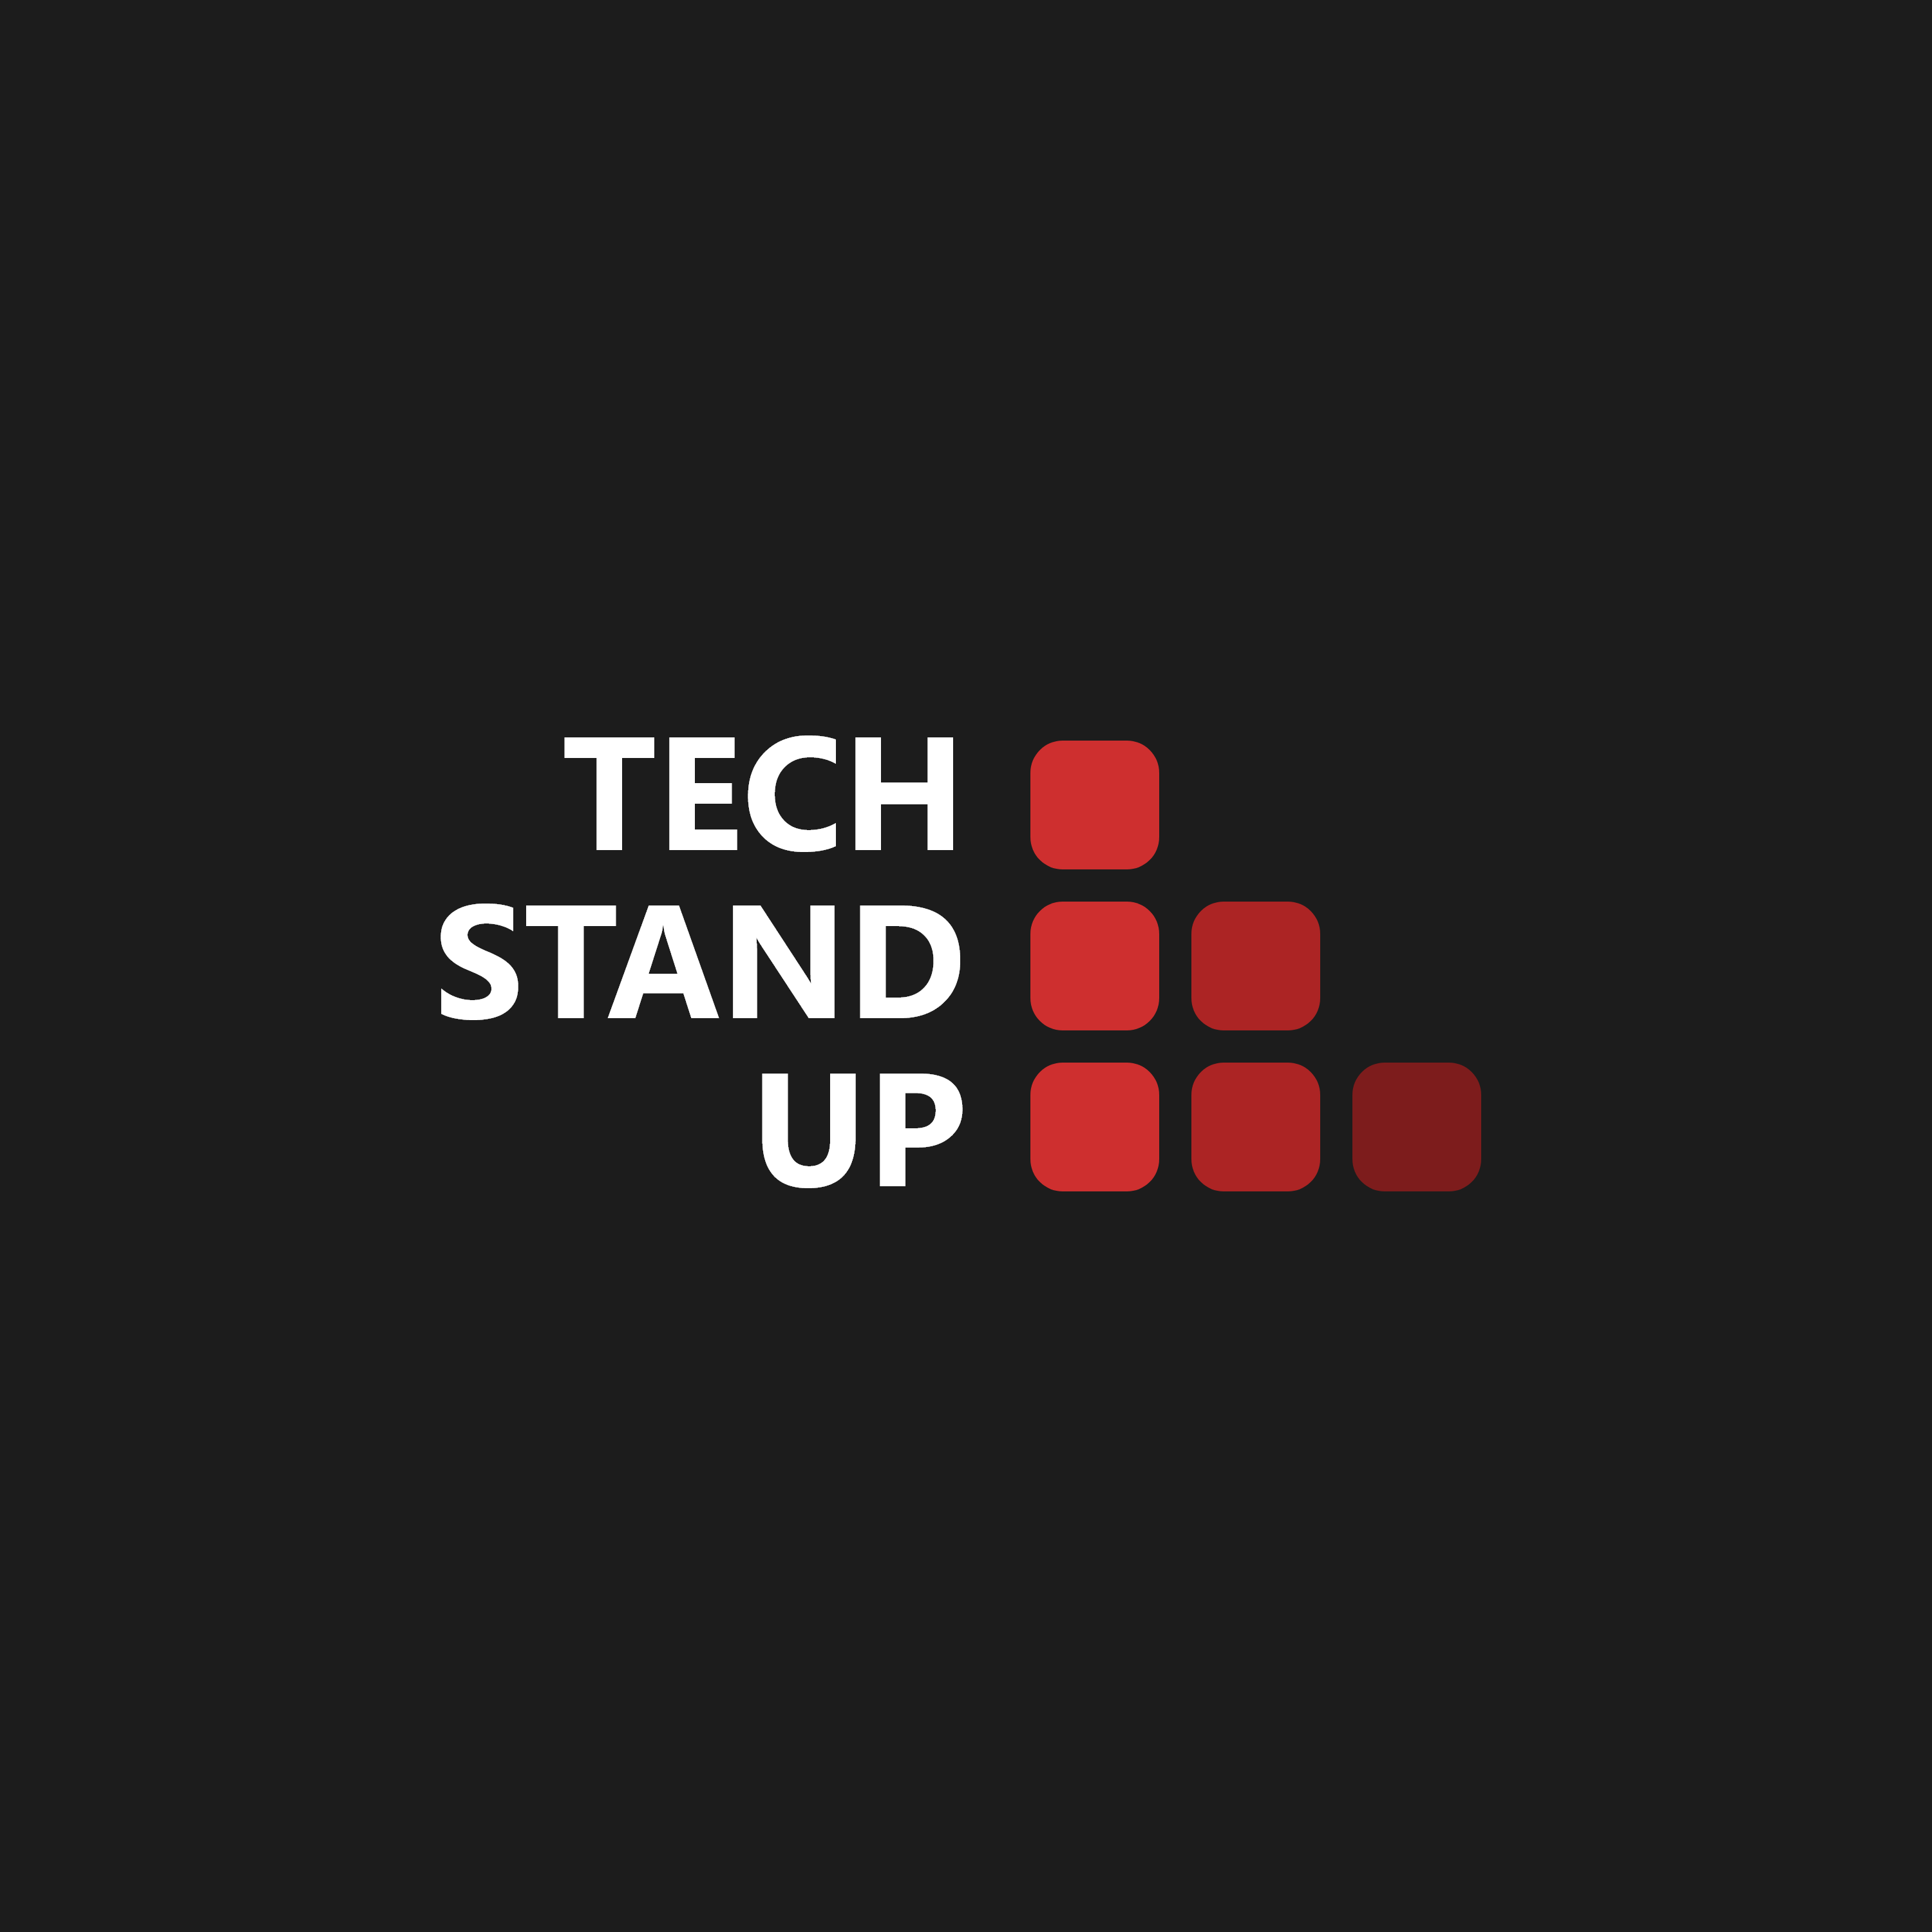 Tech stand up